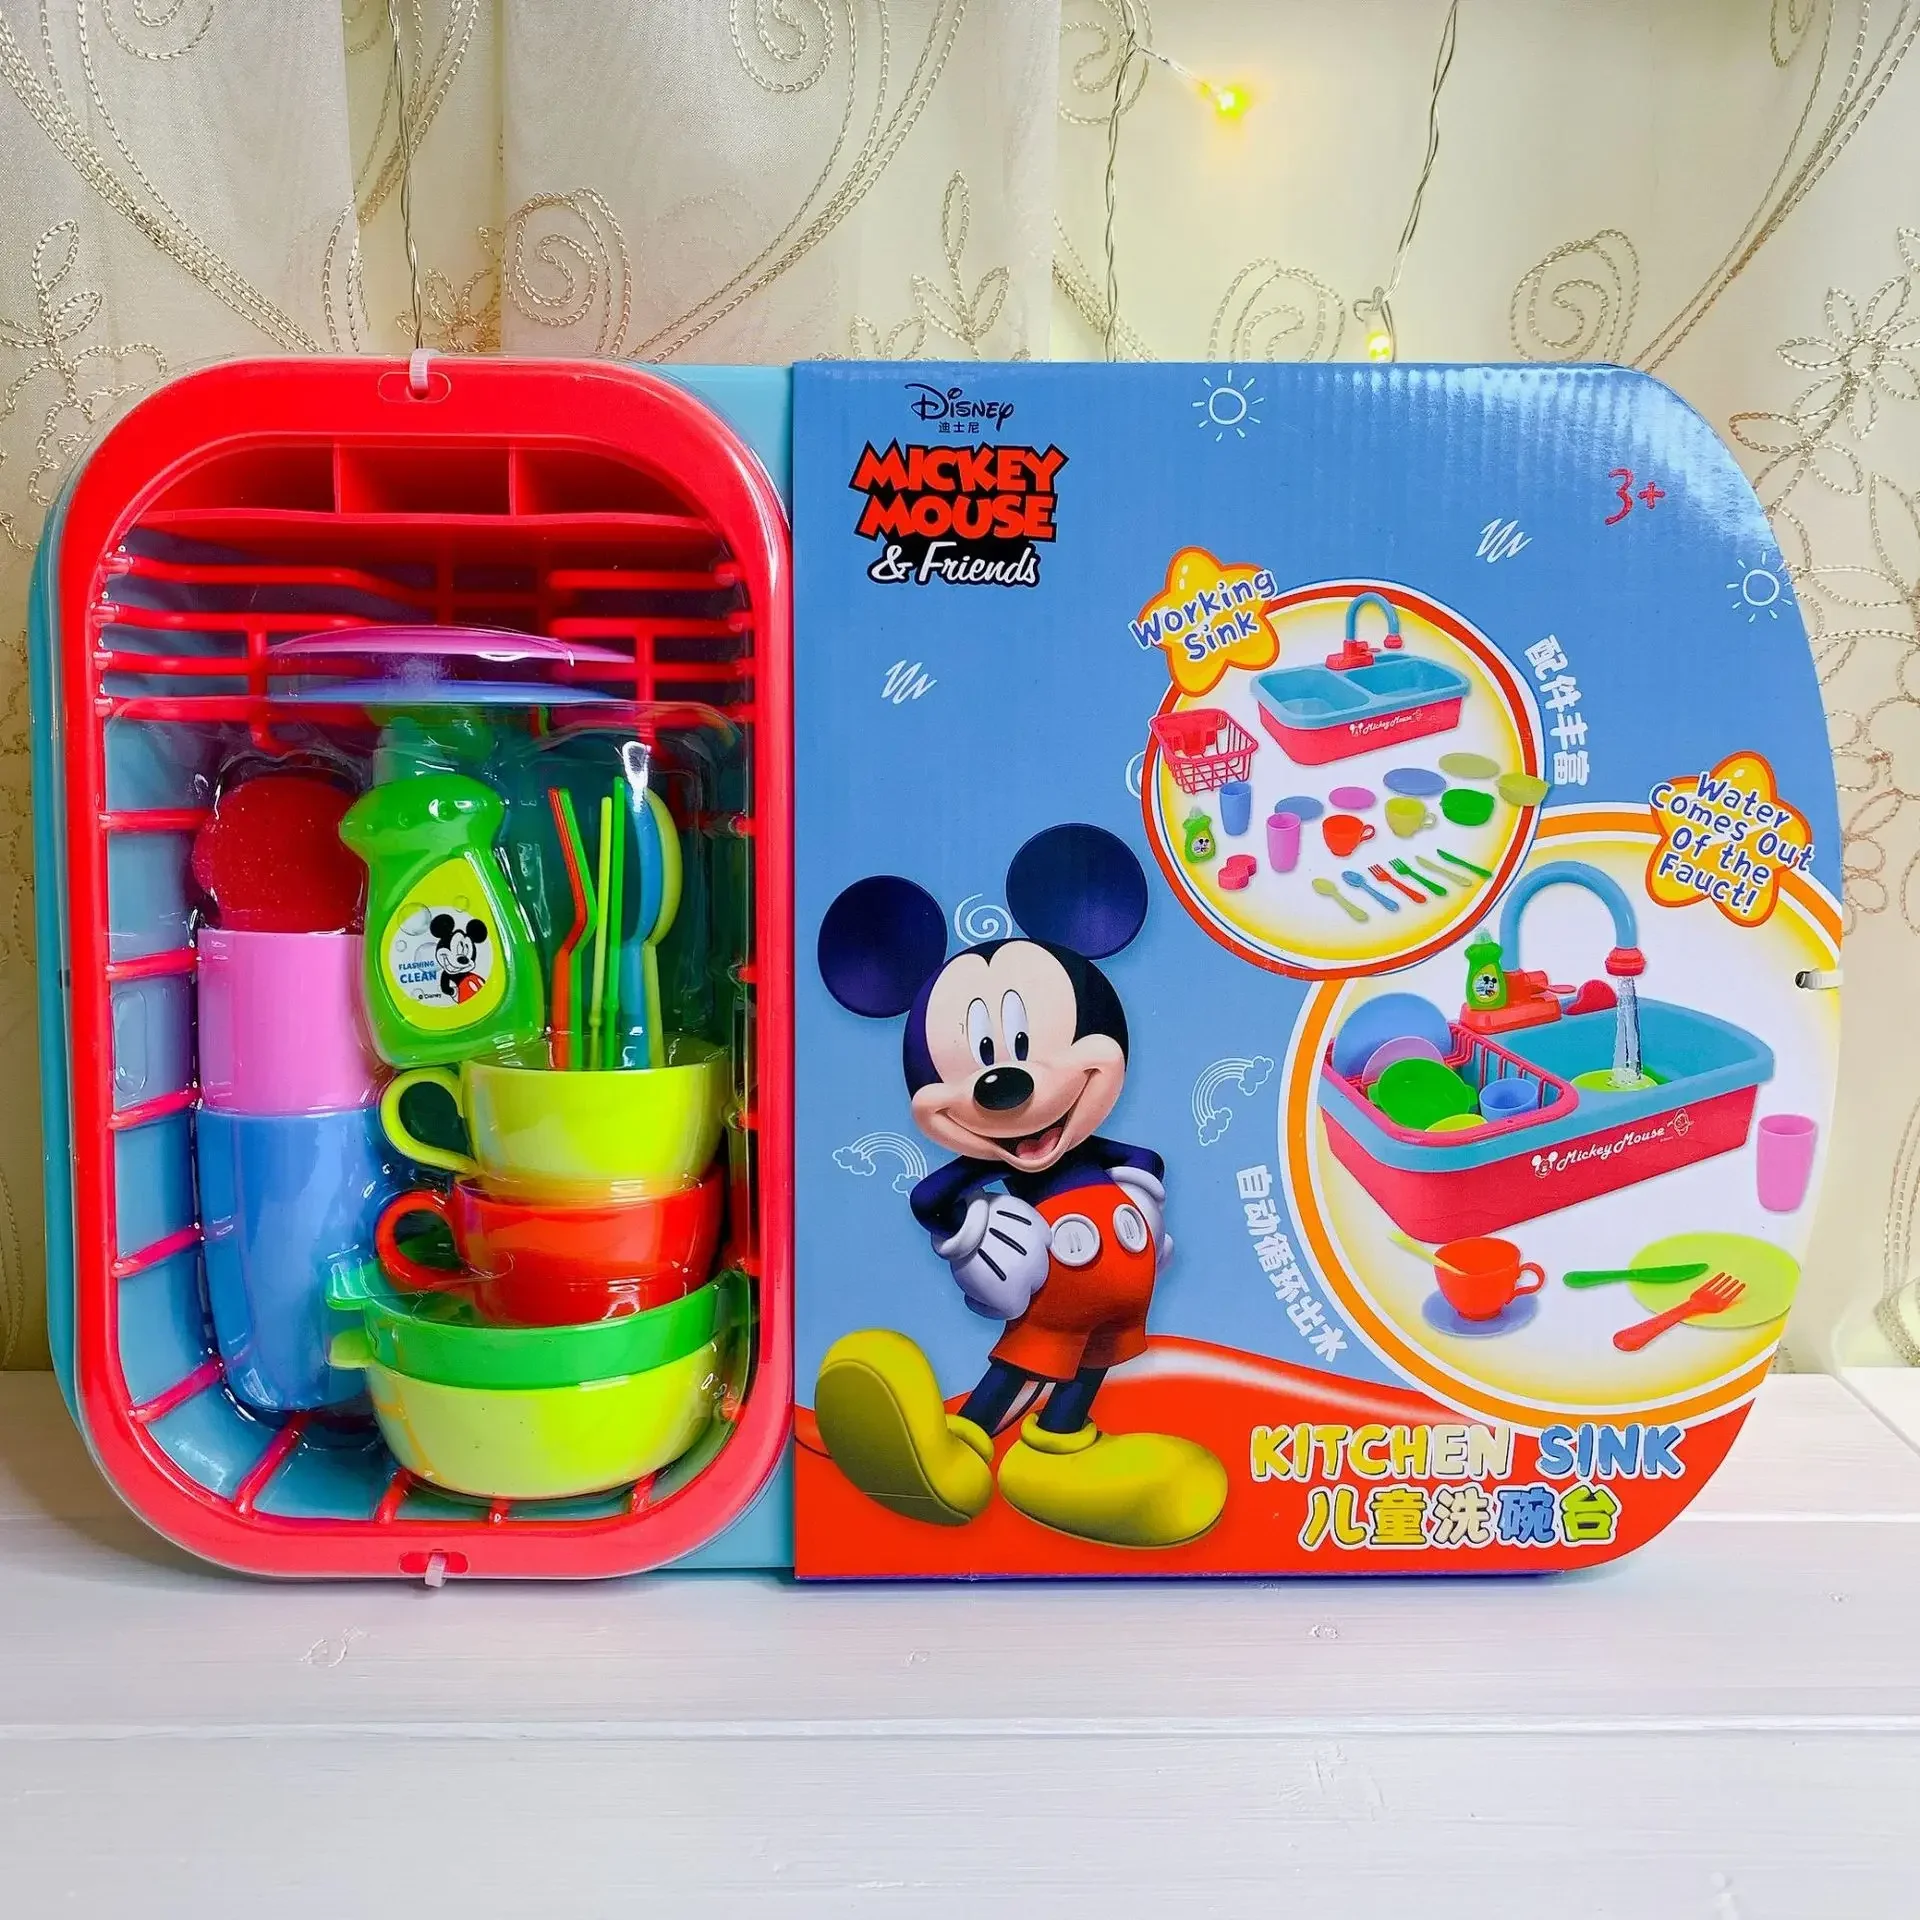 

Disney Mickey mouse Kitchen Cooking Electric dishwasher kitchen sink water tap wash dishes game toy Play house Interactive Toy